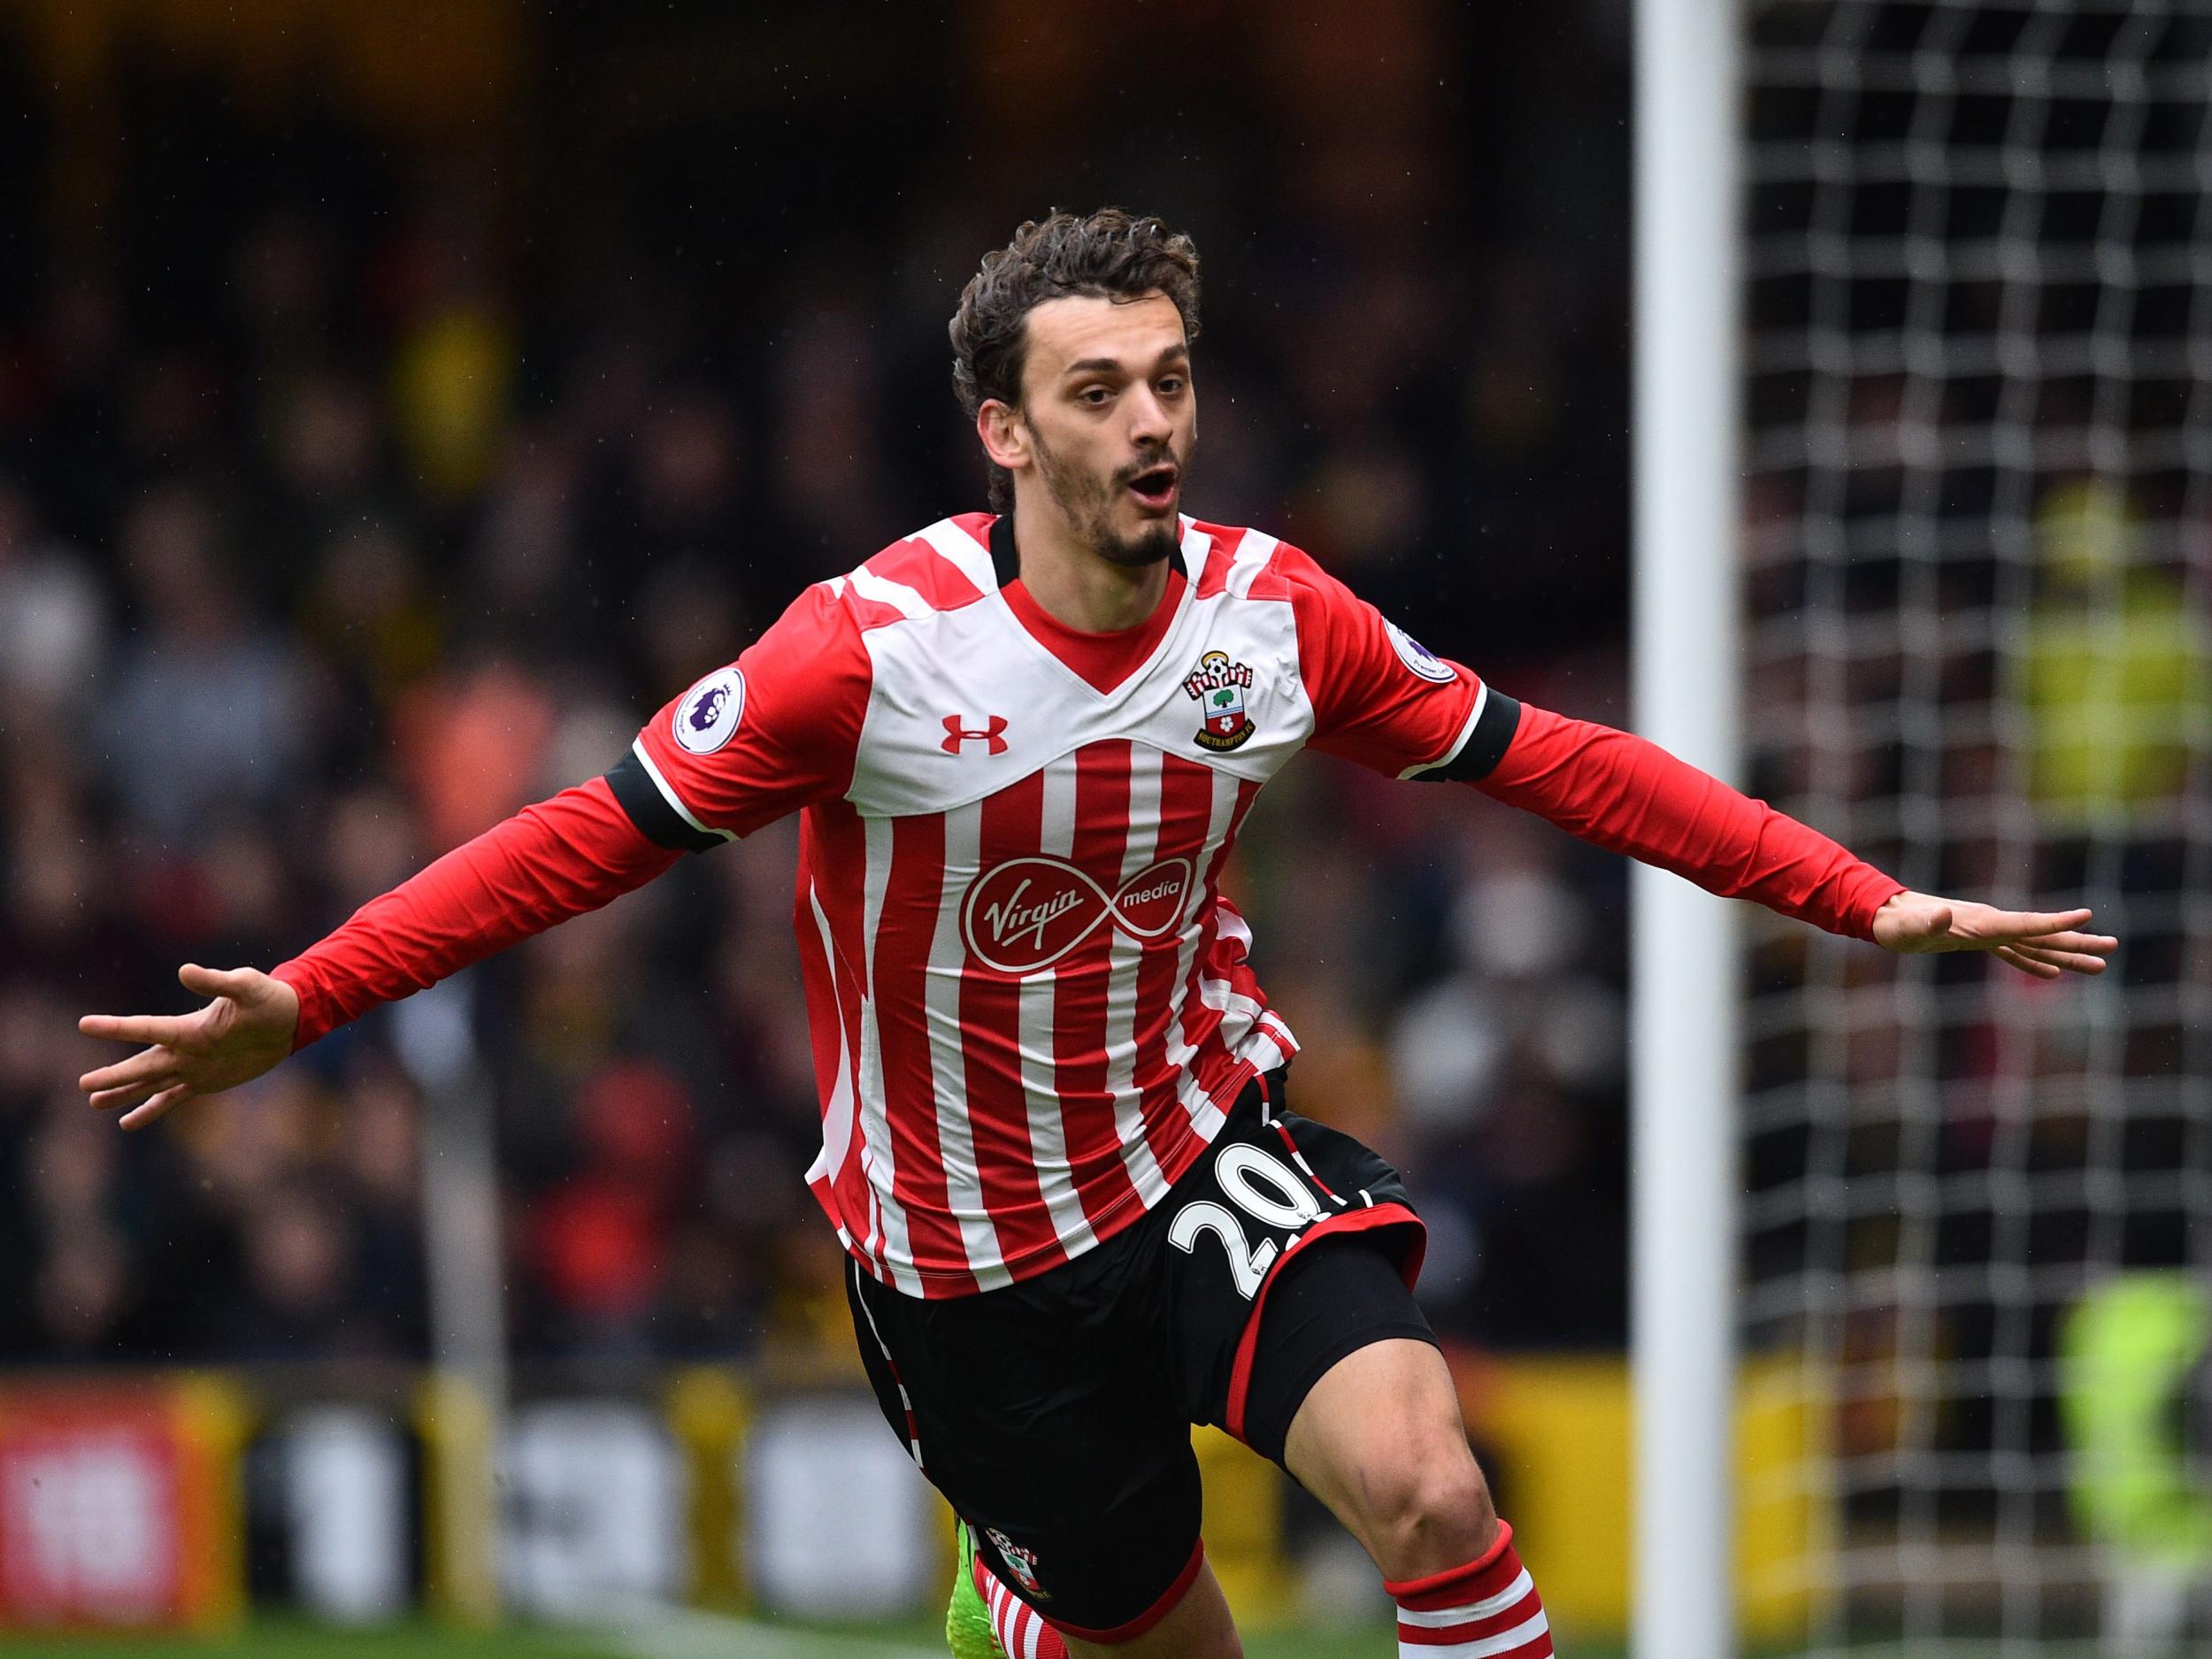 Manolo Gabbiadini continued his rich goalscoring streak since joining the Saints